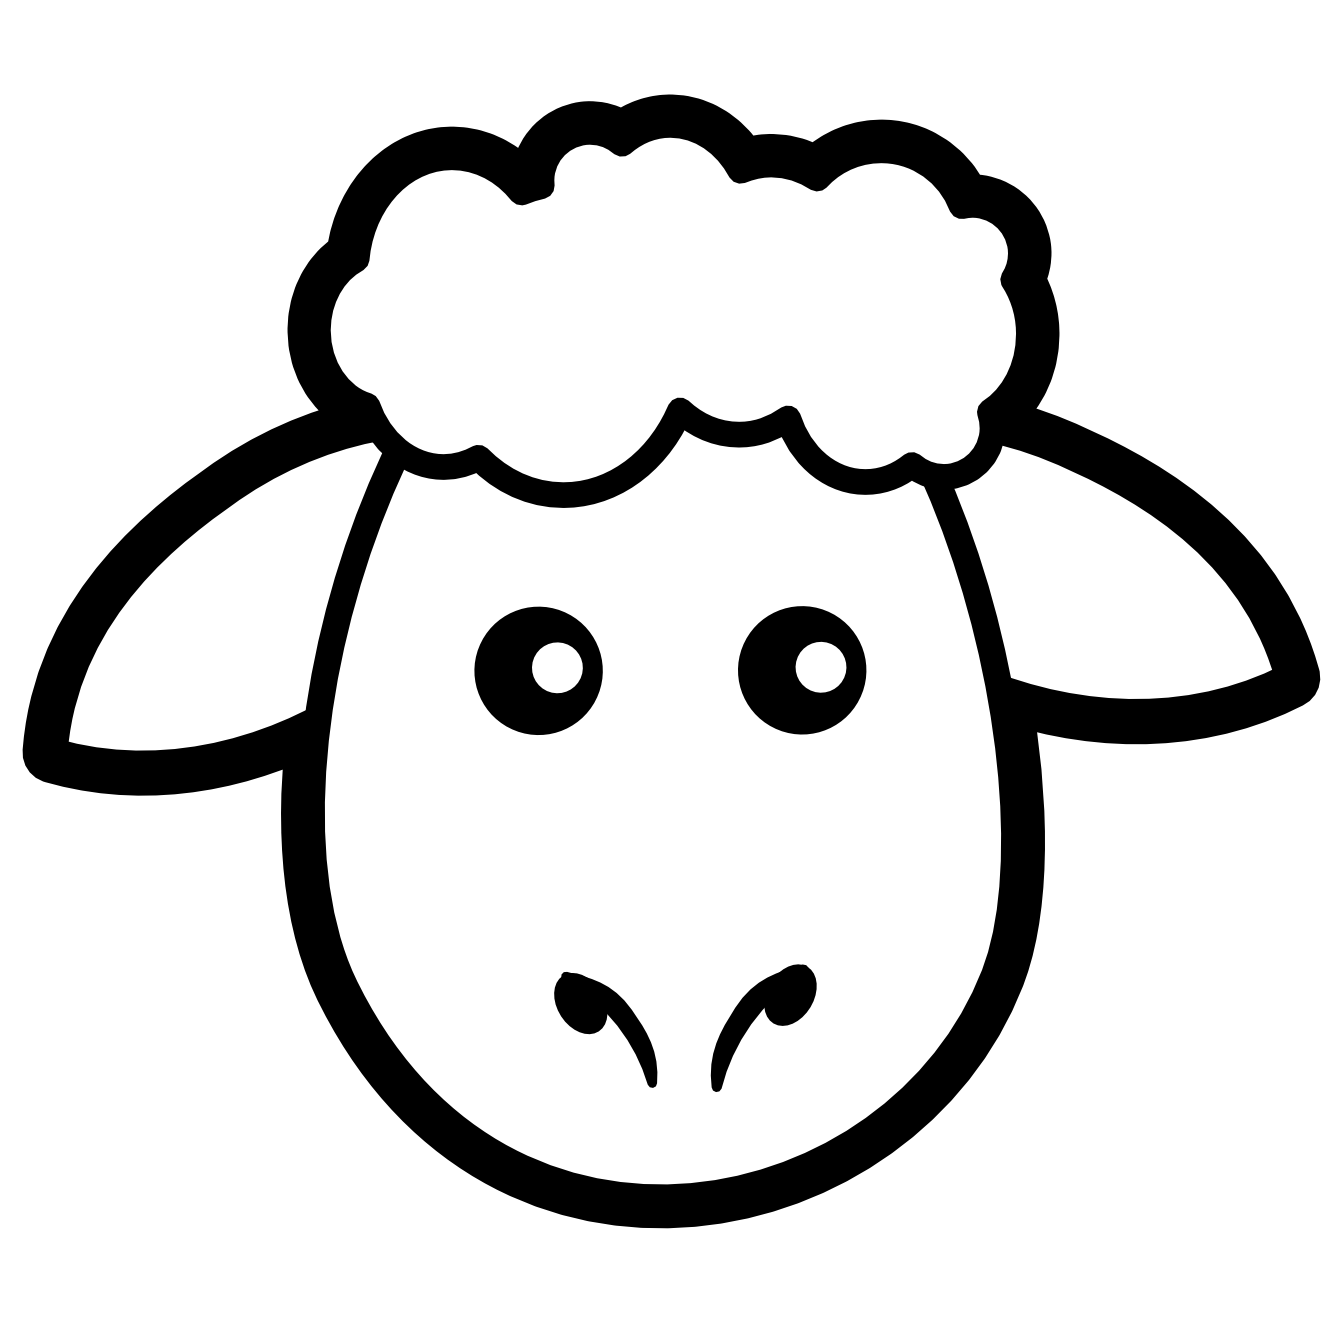 Best Photos of Lamb Outline Template - Sheep Template, Cotton Ball ...